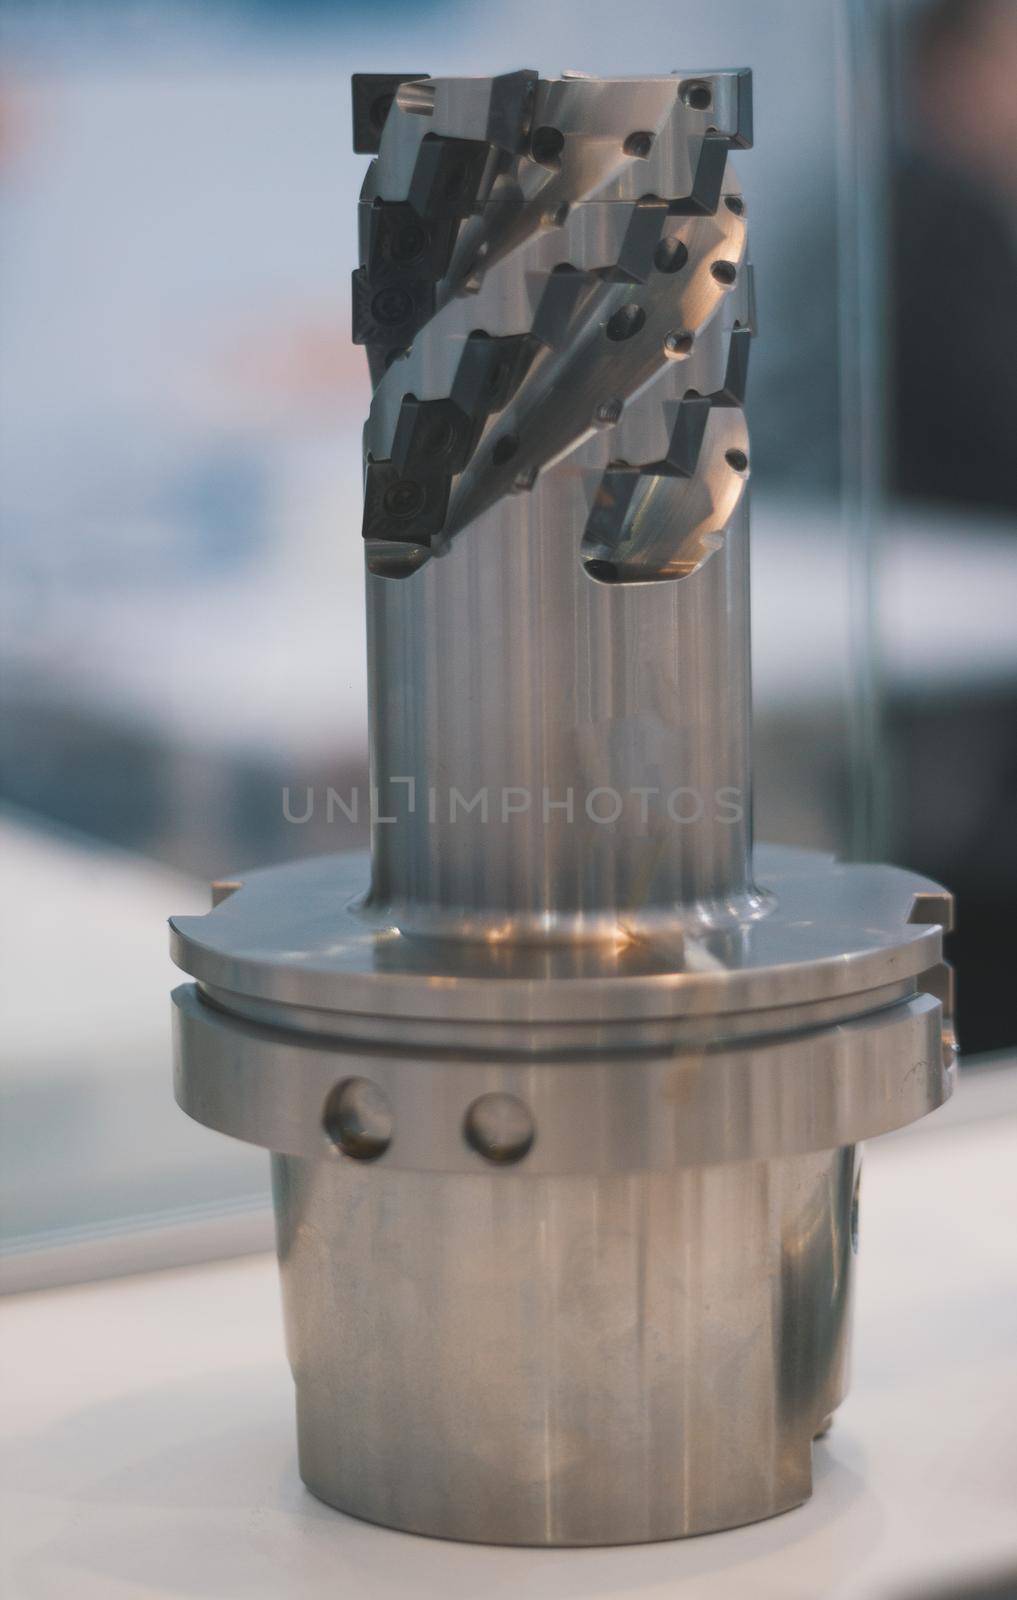 Milling cutter head for wood processing - metal industry by Studia72